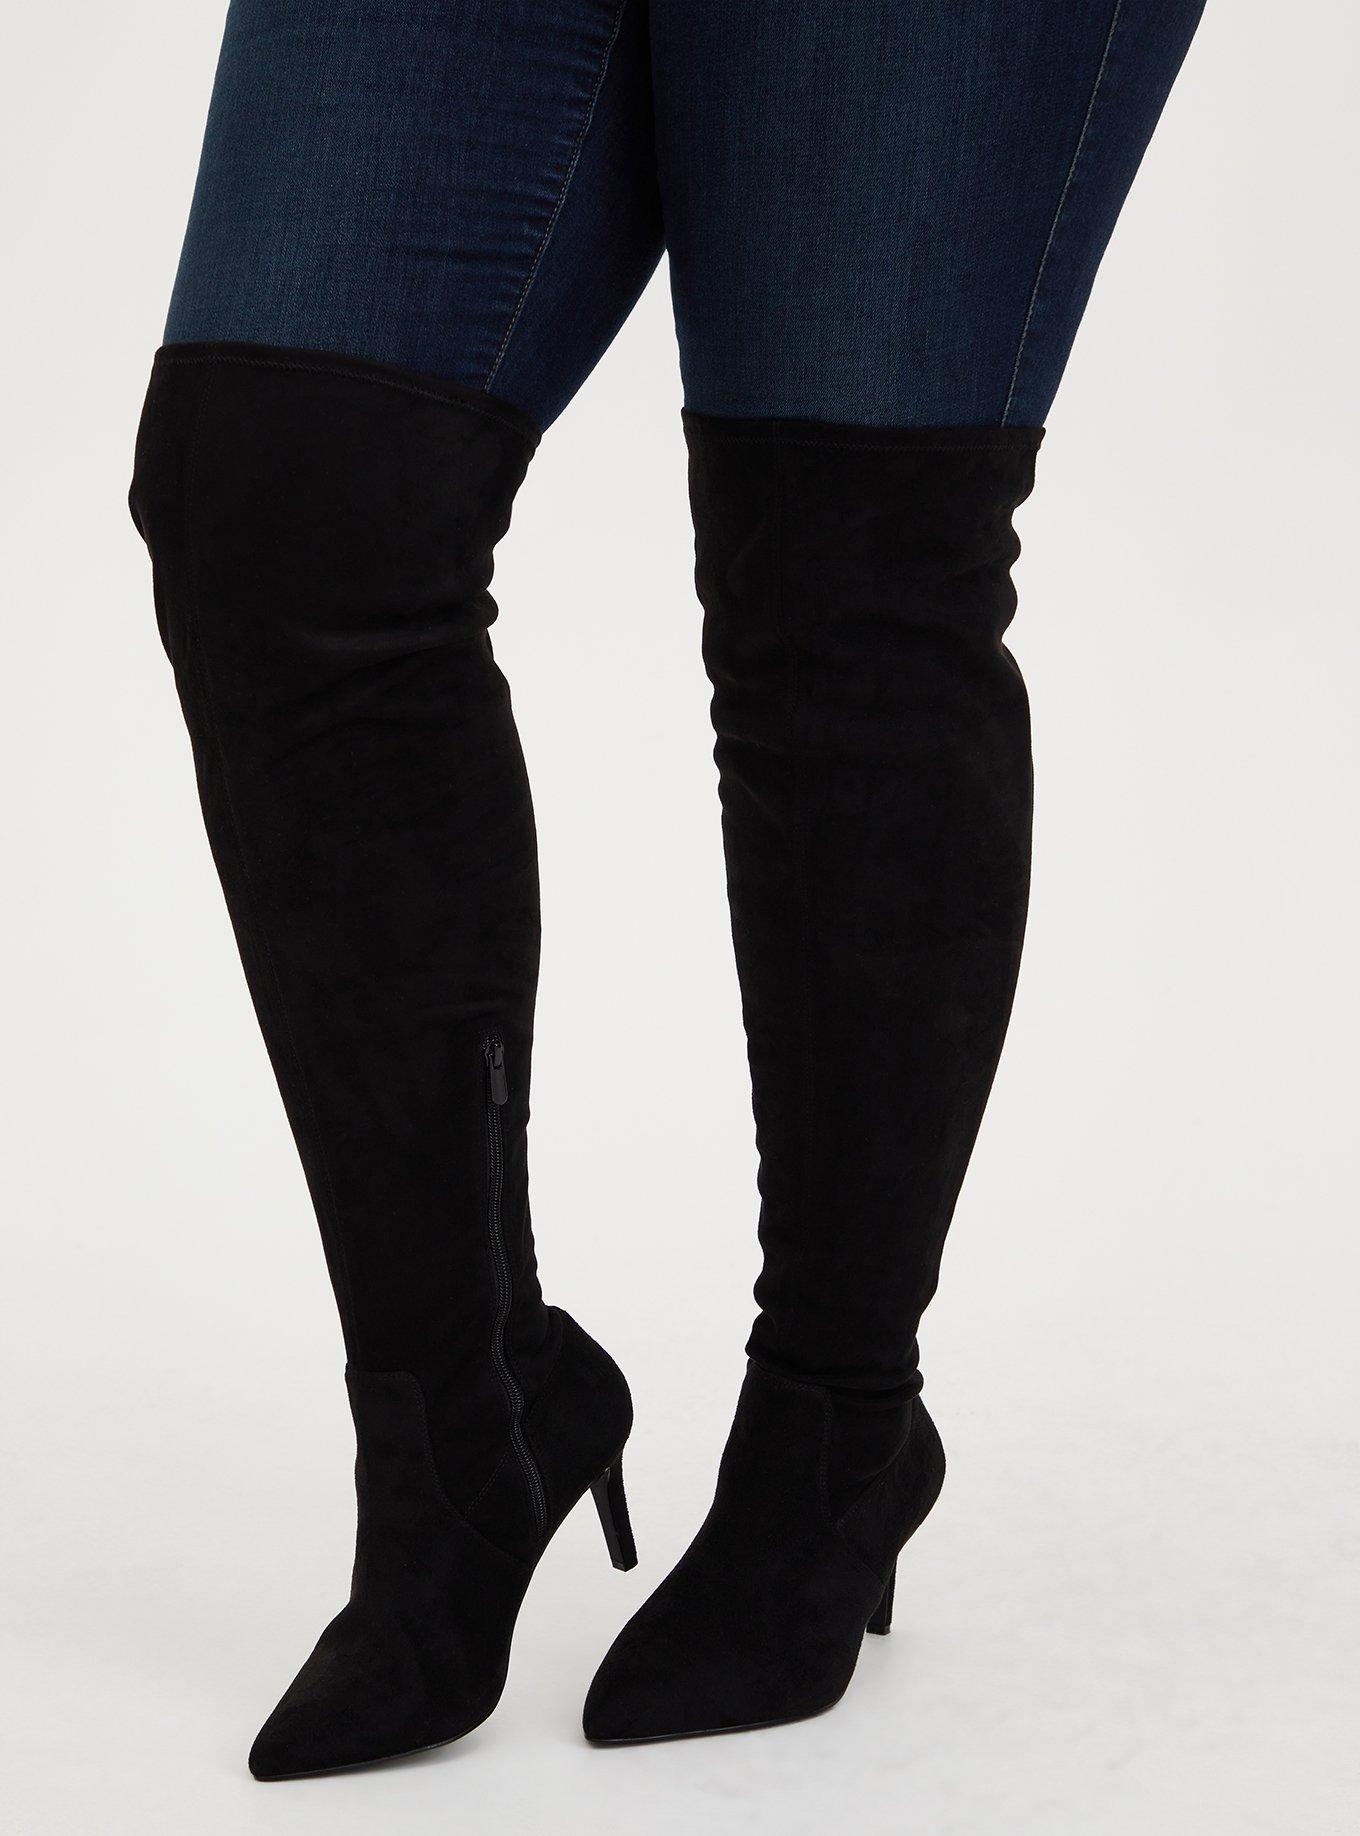 2022 F 1004 Custom-made knee-high and thigh-high boots in a color